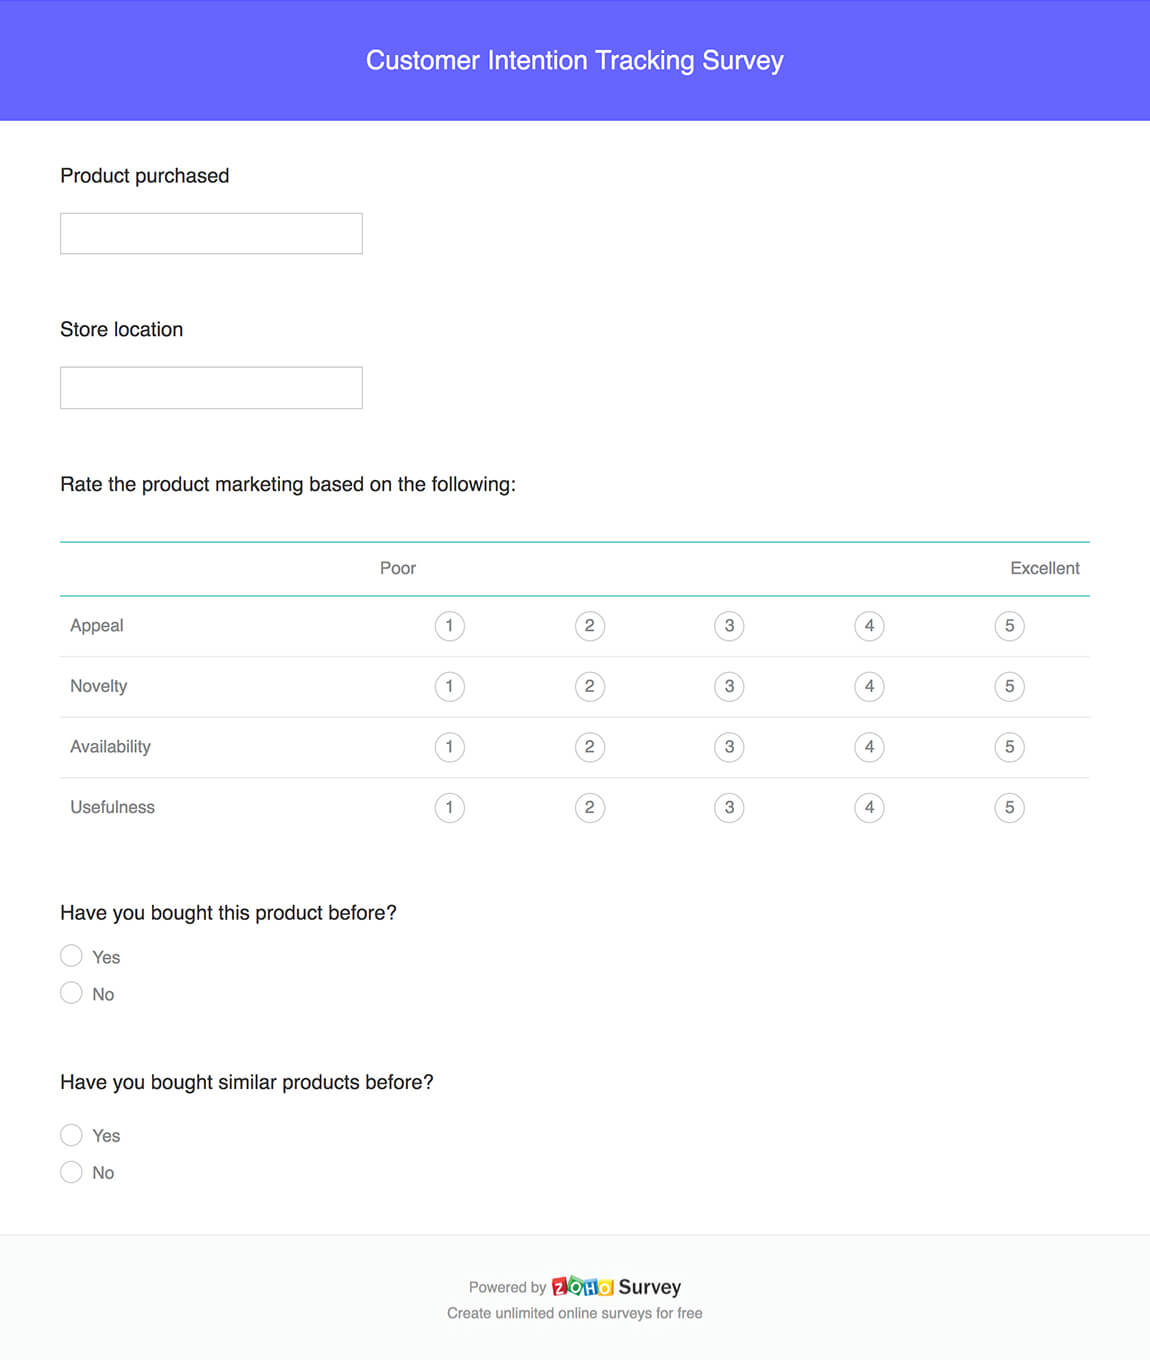 Customer intention tracking survey questionnaire template